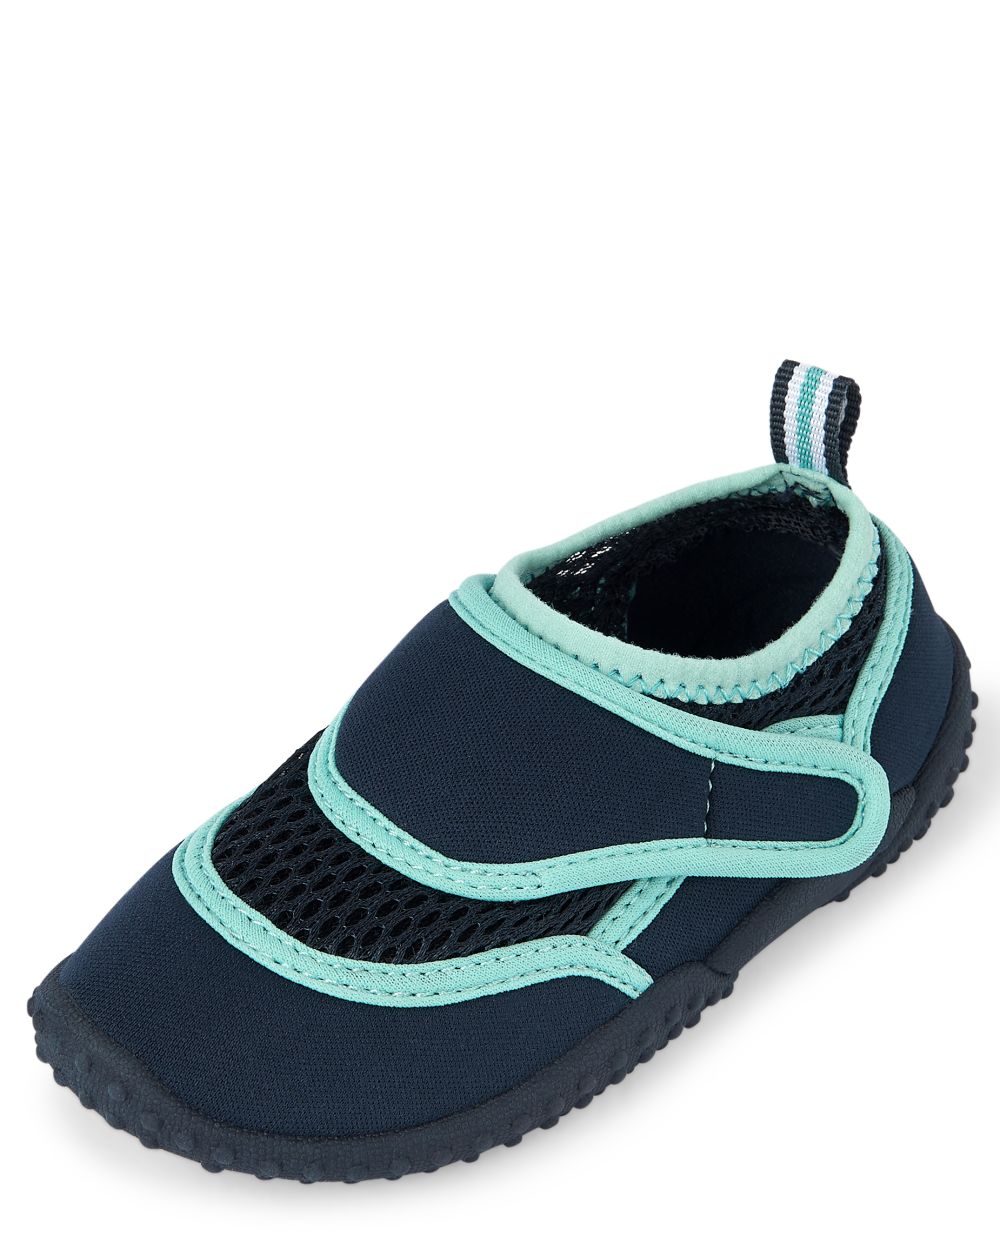 

s Toddler Boys Water Shoes - Blue - The Children's Place